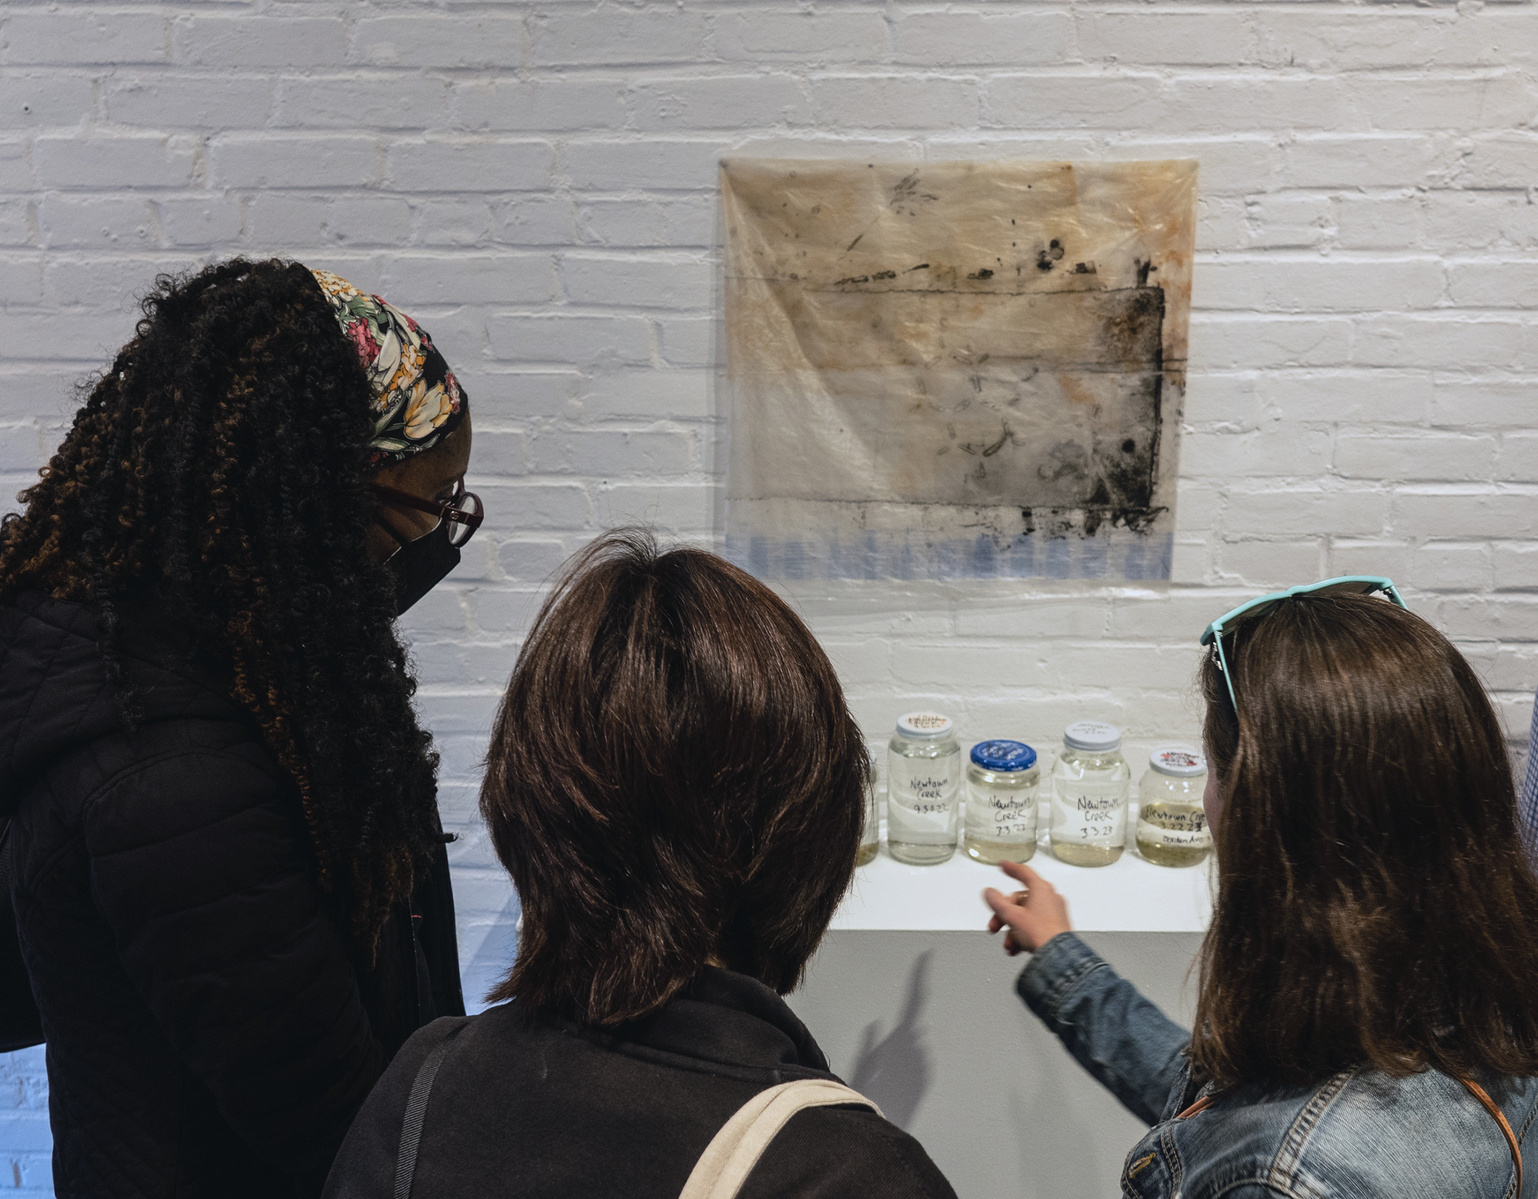 Visitors look at "Samples" and "Troubled Waters 11", works from Priscilla Stadler's SLUDGE project, an art installation created in response to researching Newtown Creek, a toxic waterway dividing Queens & Brooklyn, NYC.